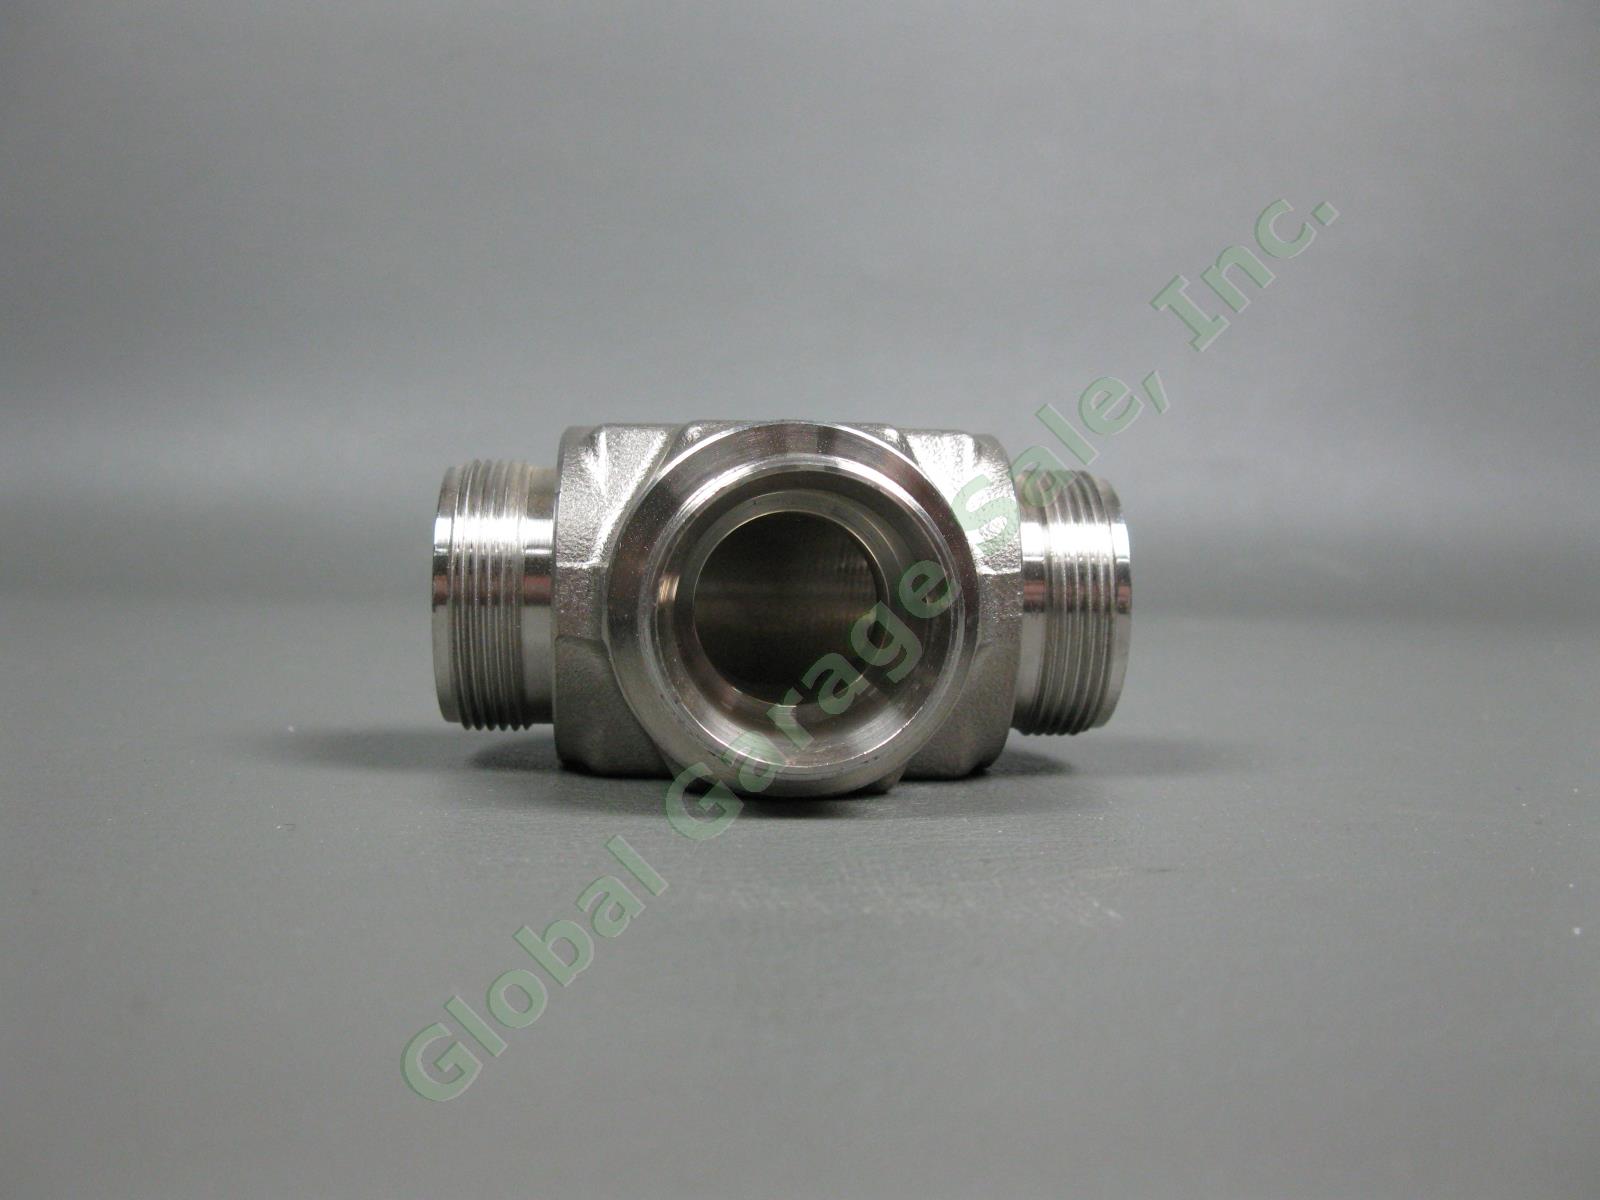 6 Swagelok 7/8" OD SS 314 Compression Tube Fitting Union Tee Nut Less Ferrules 7